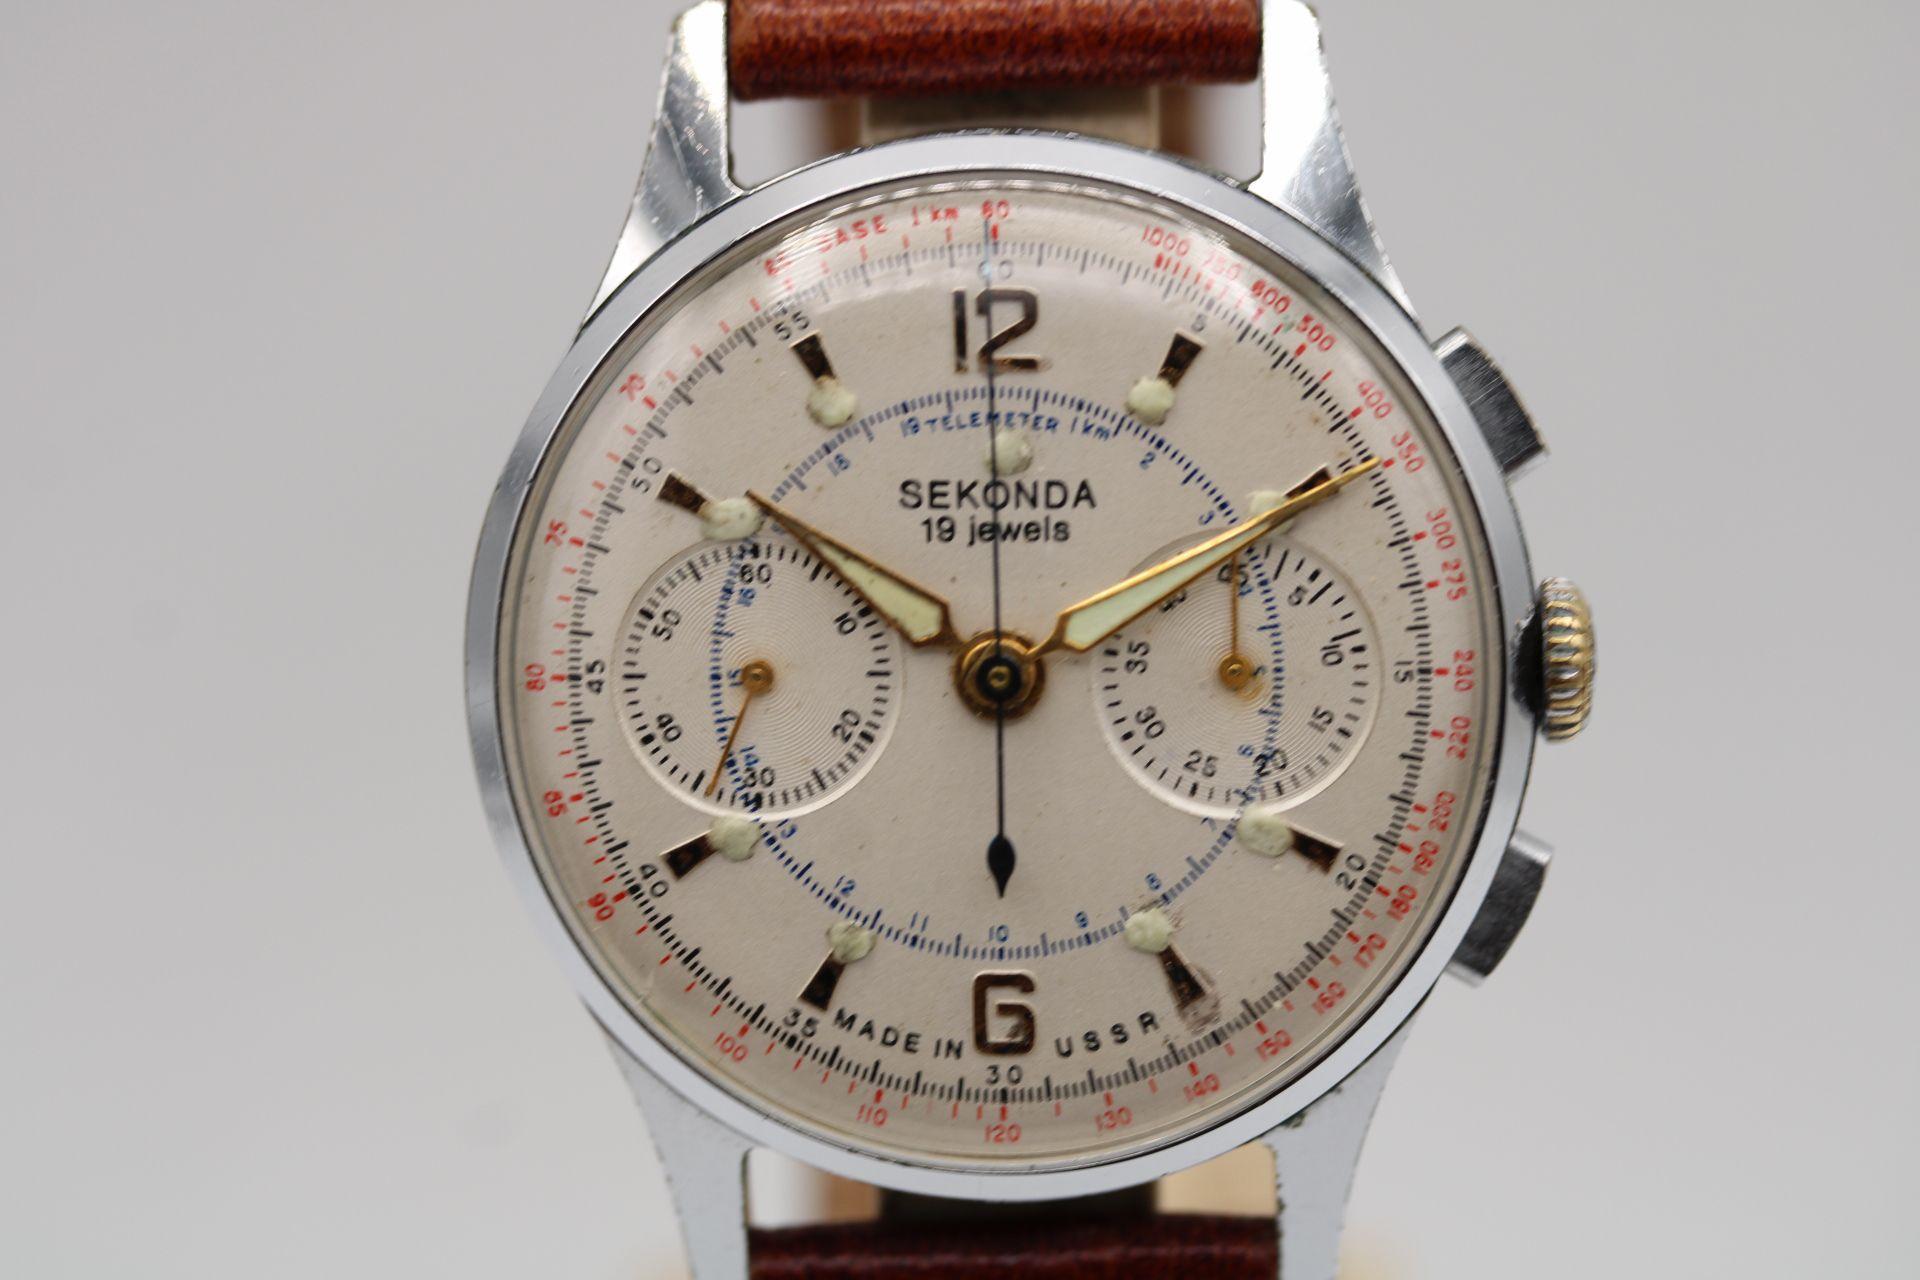 Watch: Sekonda Strela 3017 Chronograph
Price: £850
Stock Number: CHW5294

This Sekonda Strela 3017 Chronograph made in the late 50's or 60's in the USSR is in fine working order having passed through the hands of our watchmaker.

With a Movement 21